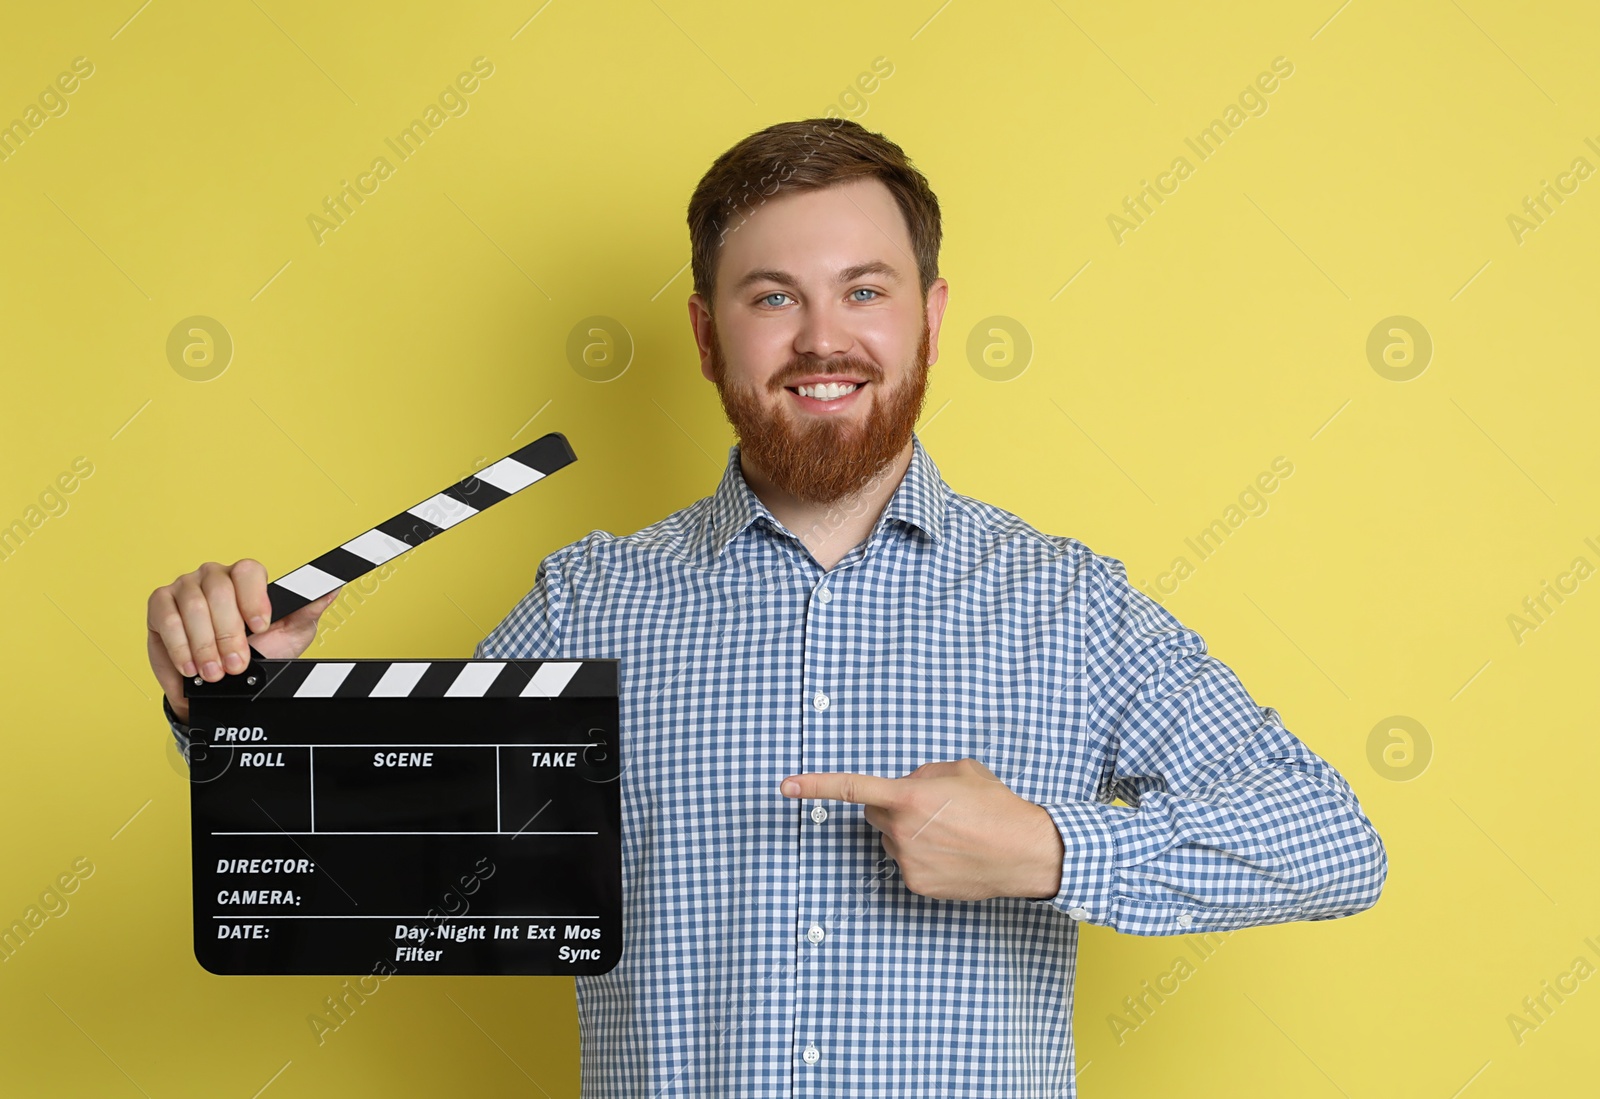 Photo of Making movie. Smiling man pointing at clapperboard on yellow background